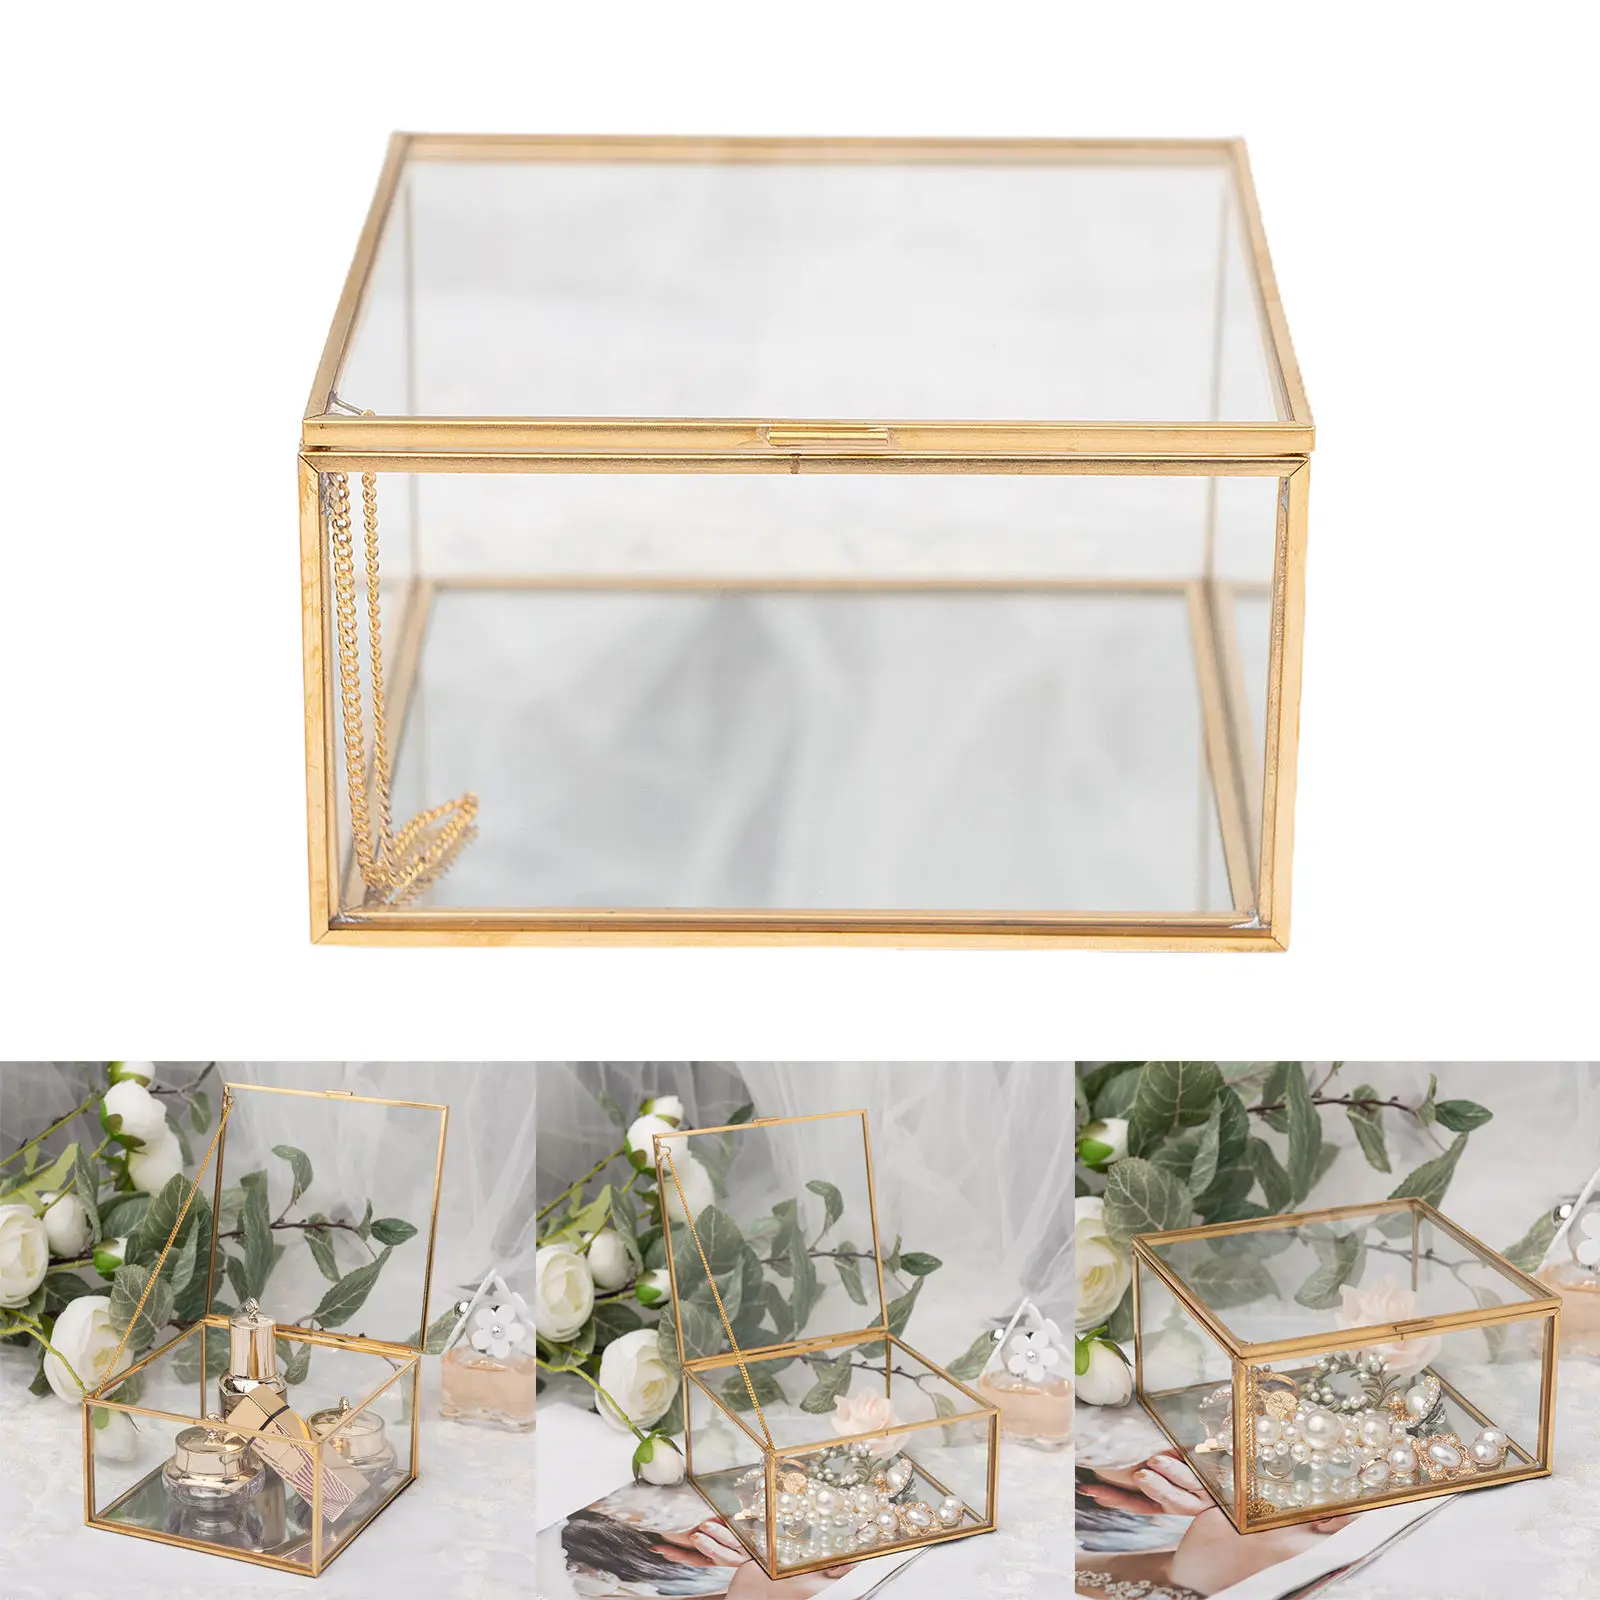 Golden Square Vintage Brass & Clear Glass Decorative Box Home Decor, Small Jewelry Case Box Organizer with Latching Lid 5x5x3